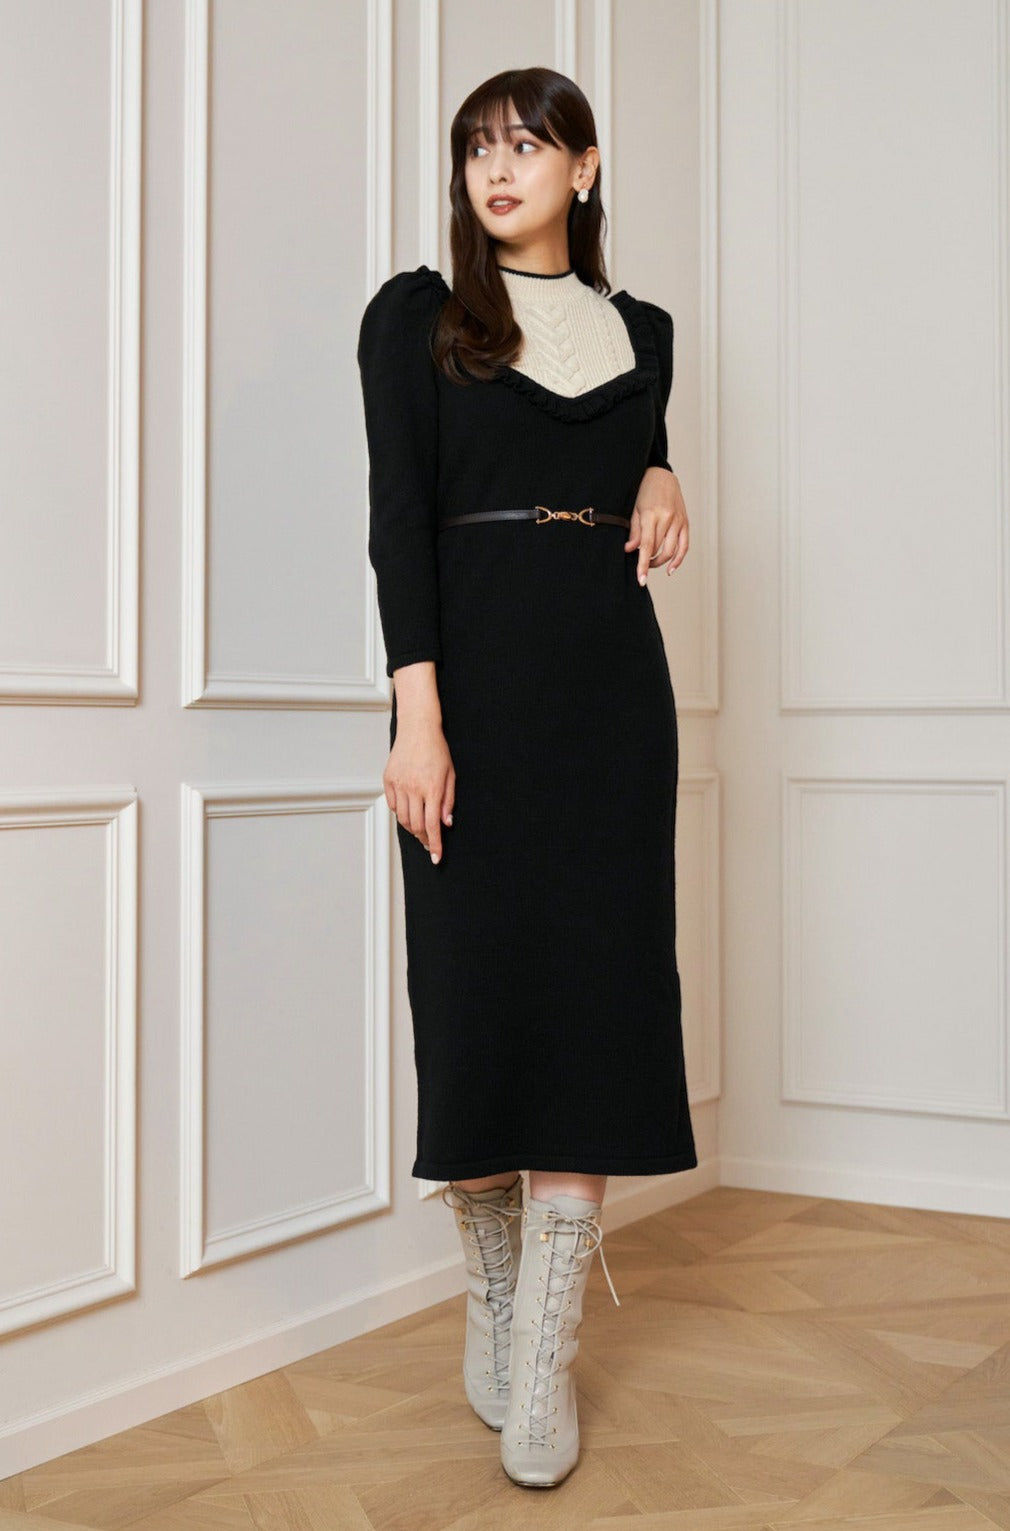 herlipto Belted Ruffle Cable-Knit Dress | kserietv.com